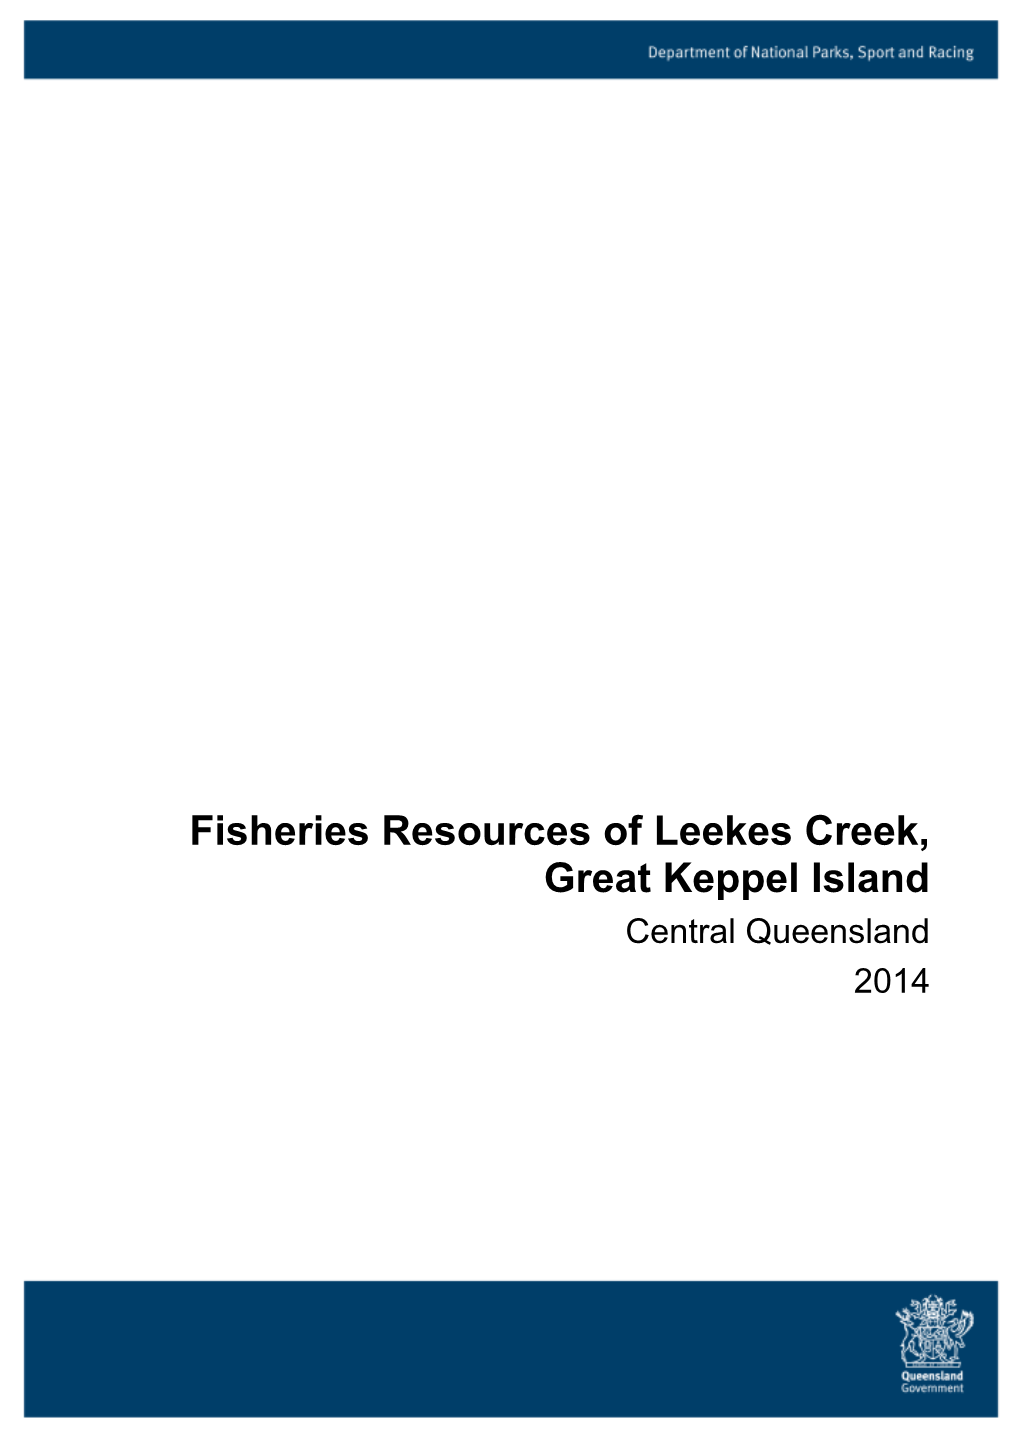 Fisheries Resources of Leekes Creek, Great Keppel Island Central Queensland 2014